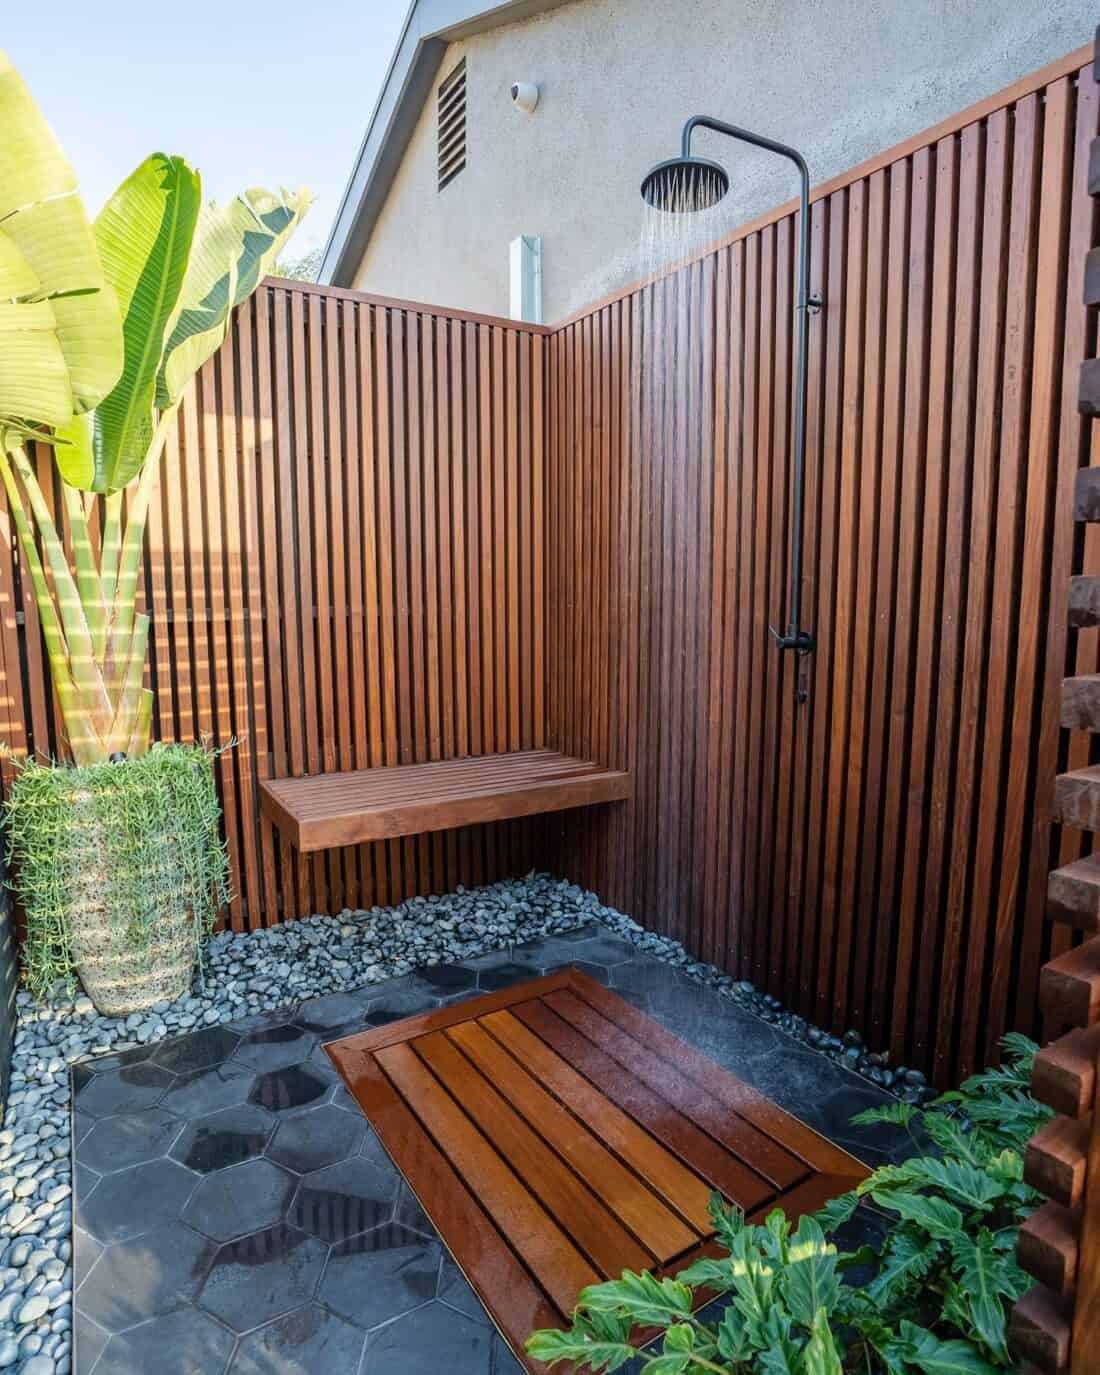 A modern outdoor shower with wooden slatted walls and flooring, featuring a black overhead shower fixture, surrounded by lush green plants and pebbles. Explore our exhaustive roundup of more outdoor shower ideas.